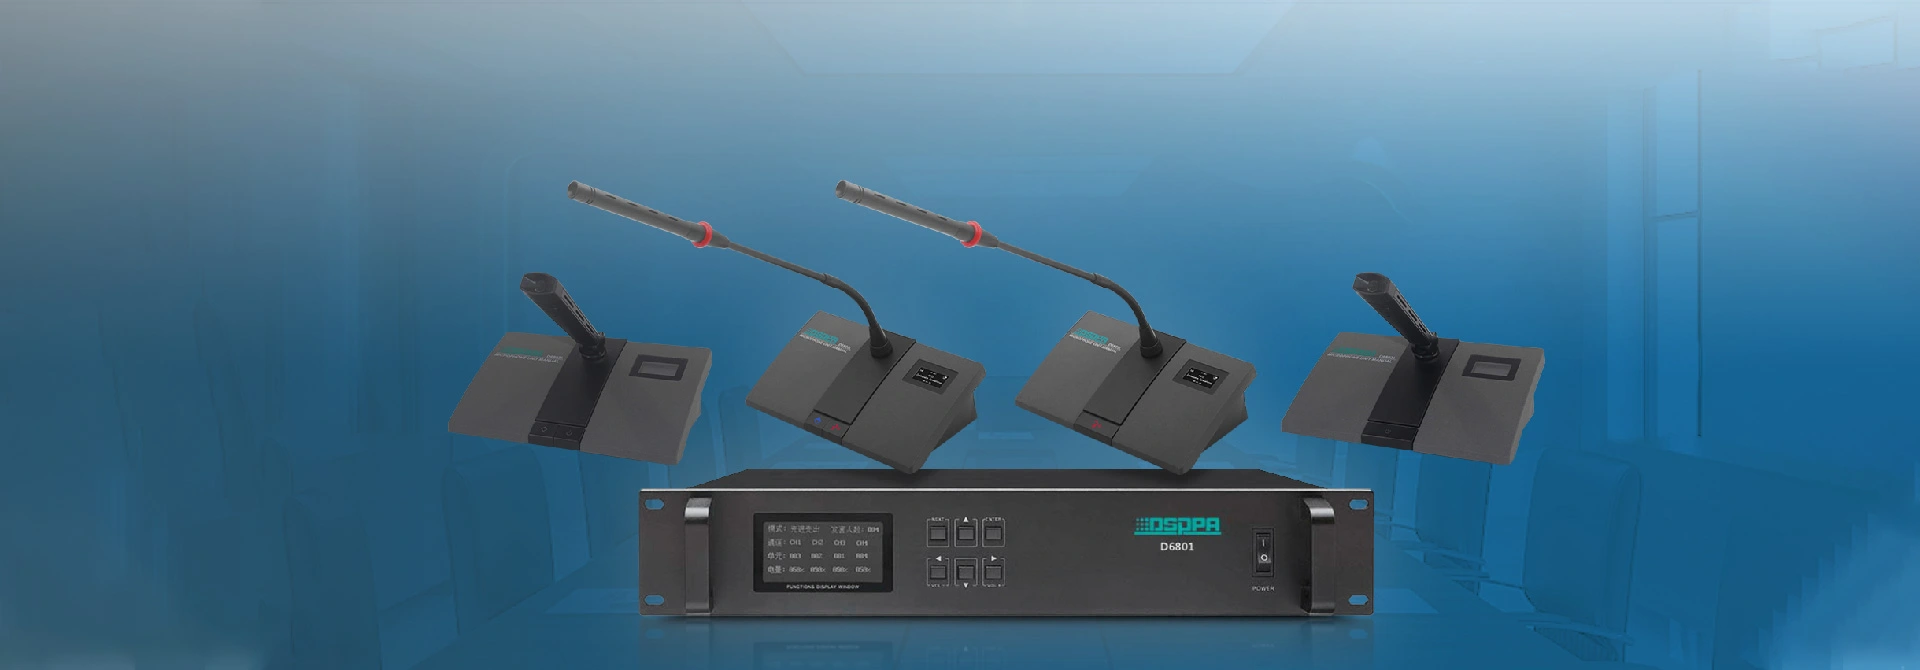 2.4G Wirless Conference System Solution for Conference